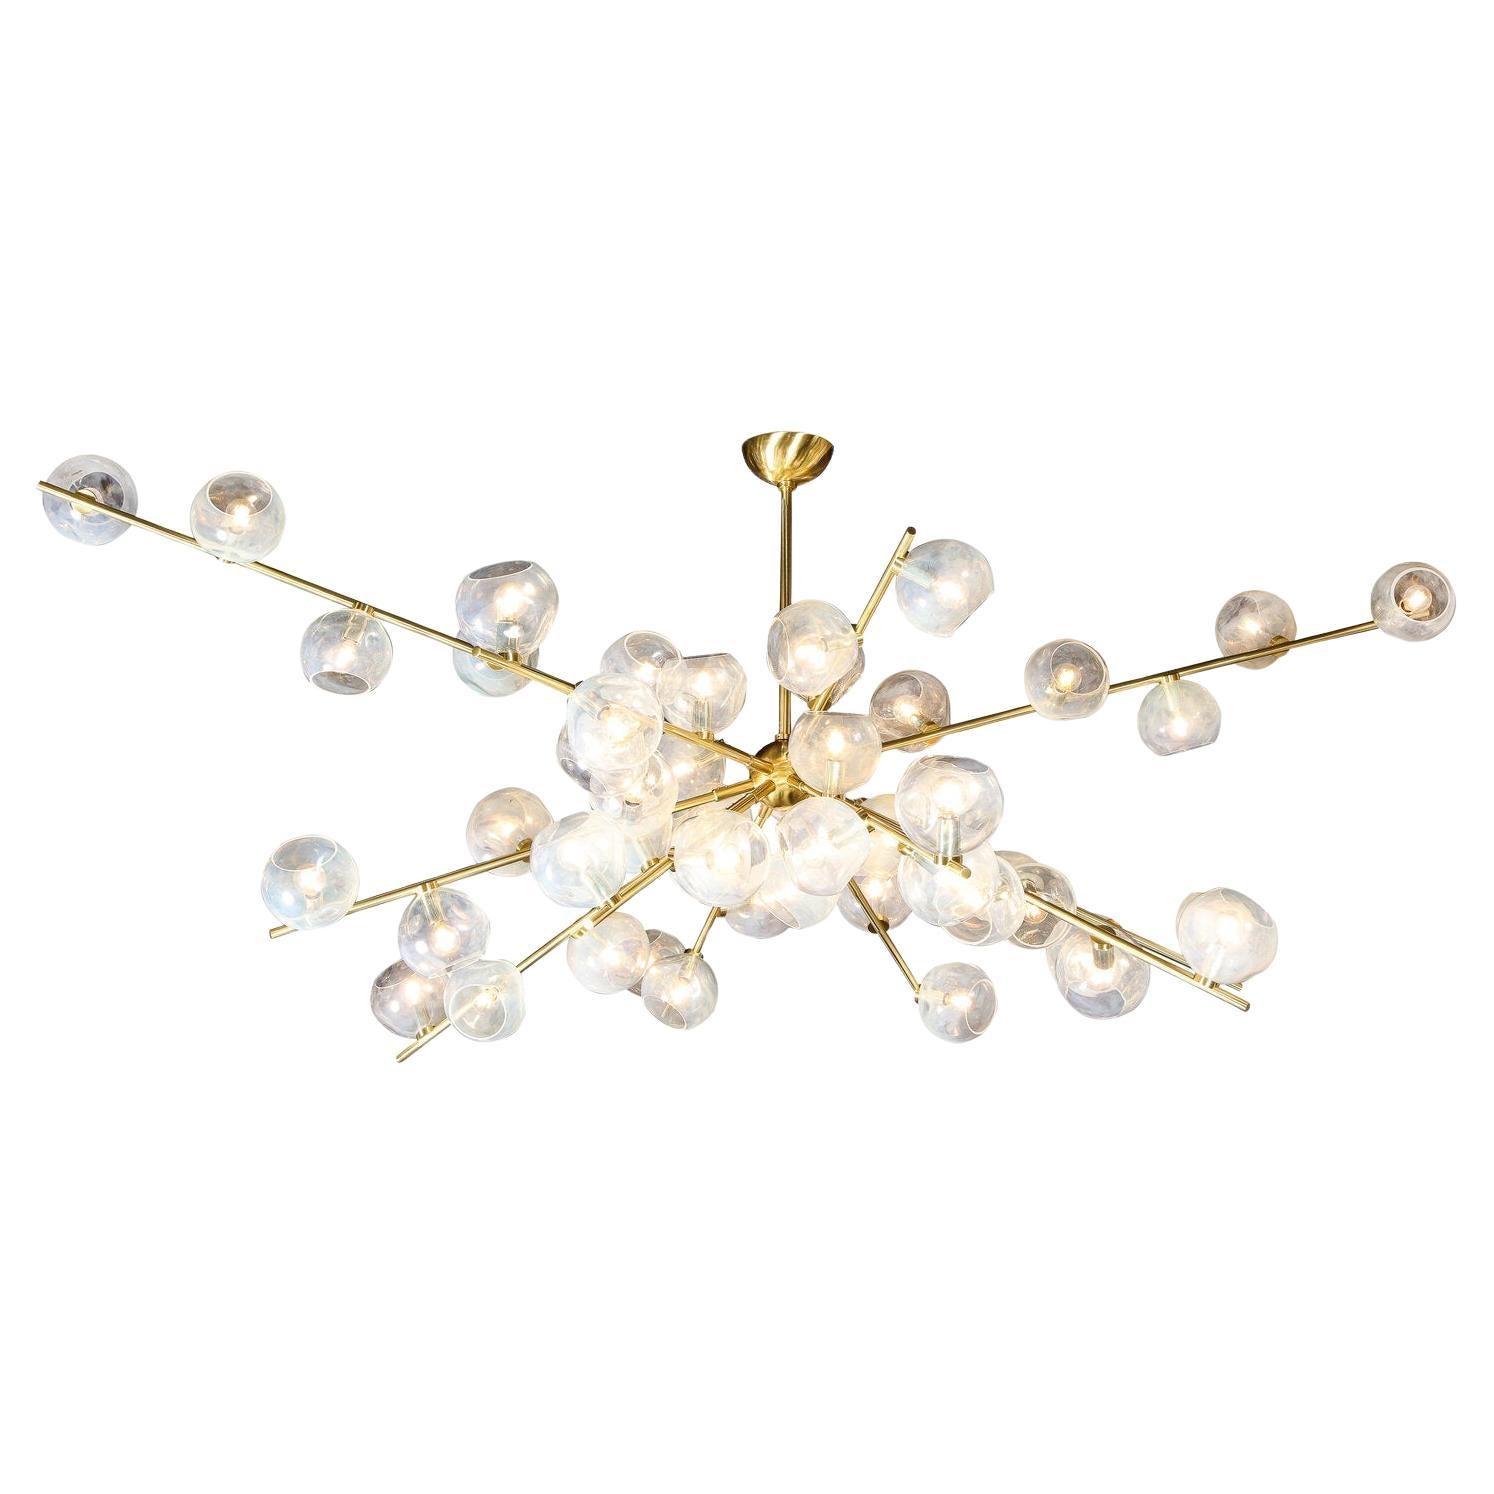 Handblown Murano Glass and Brass "Constellation" Chandelier by High Style Deco For Sale